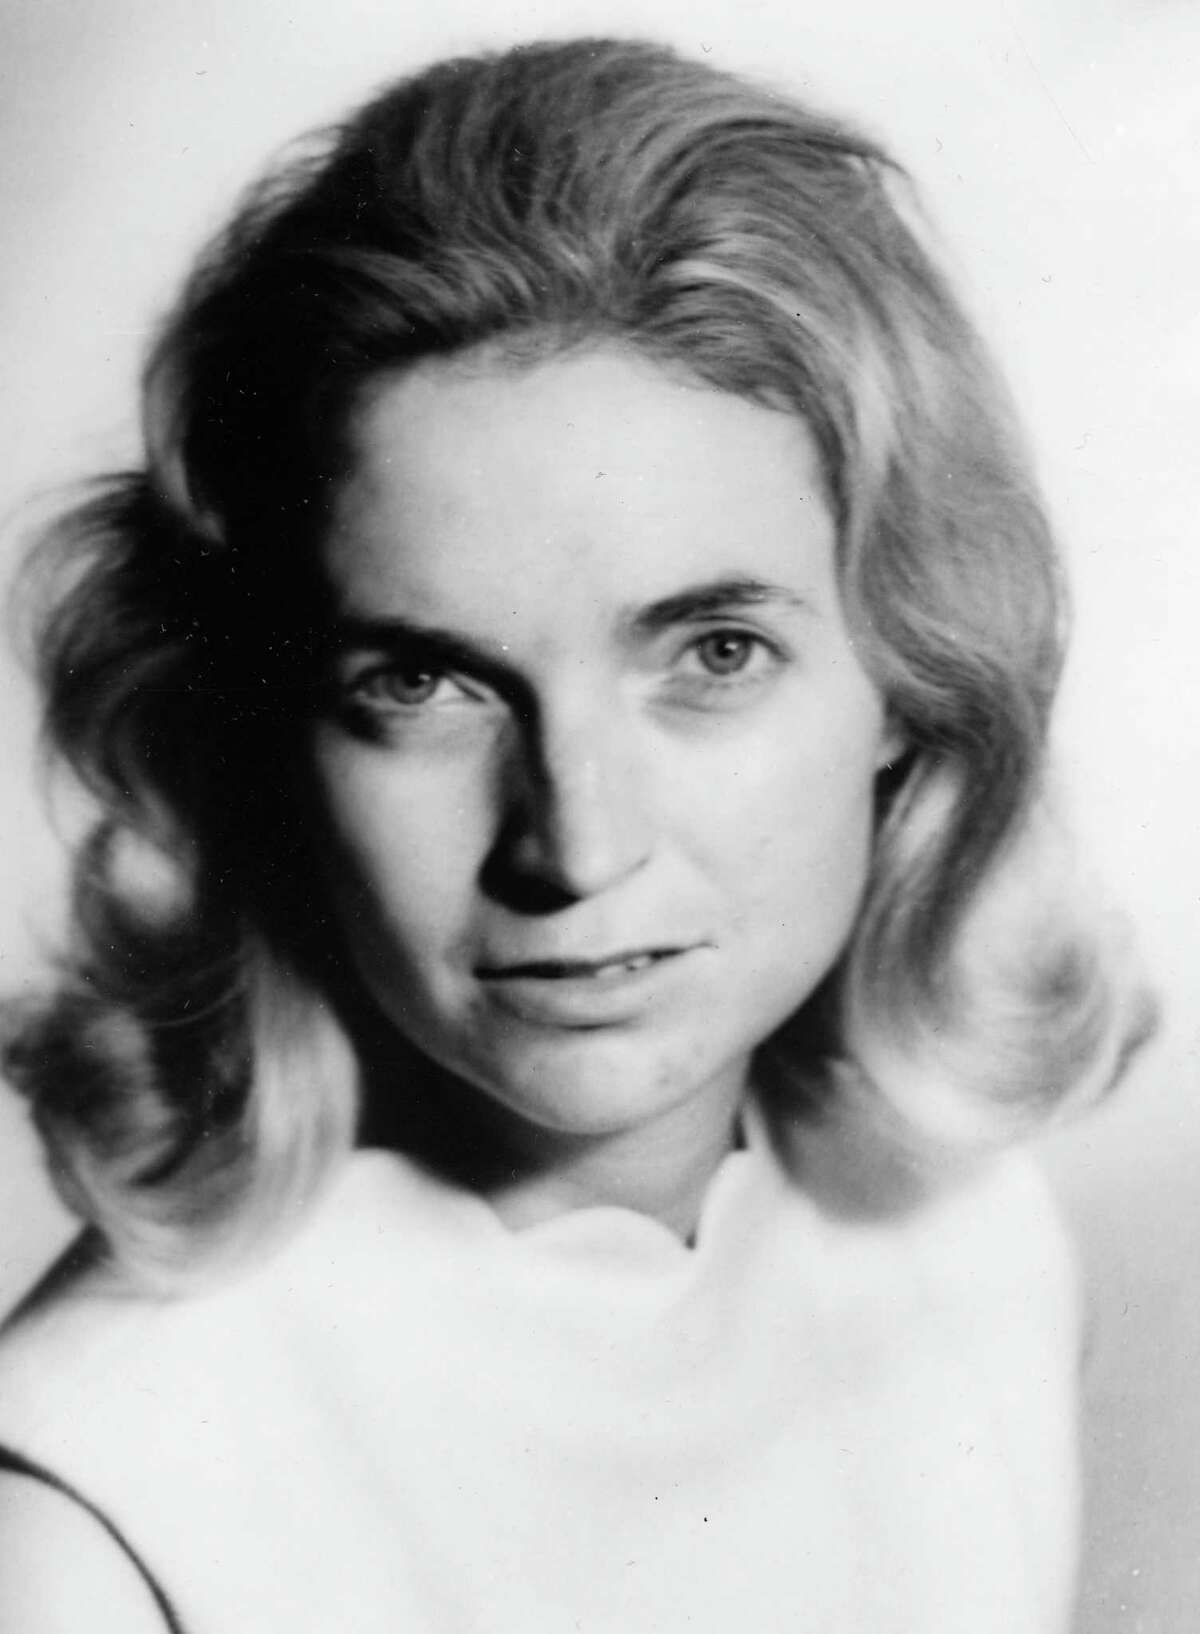 Betty Medsger, a religion reporter for The Washington Post from 1970 to 1973, broke the first stories about the burglary at the FBI office in Media, Pa.